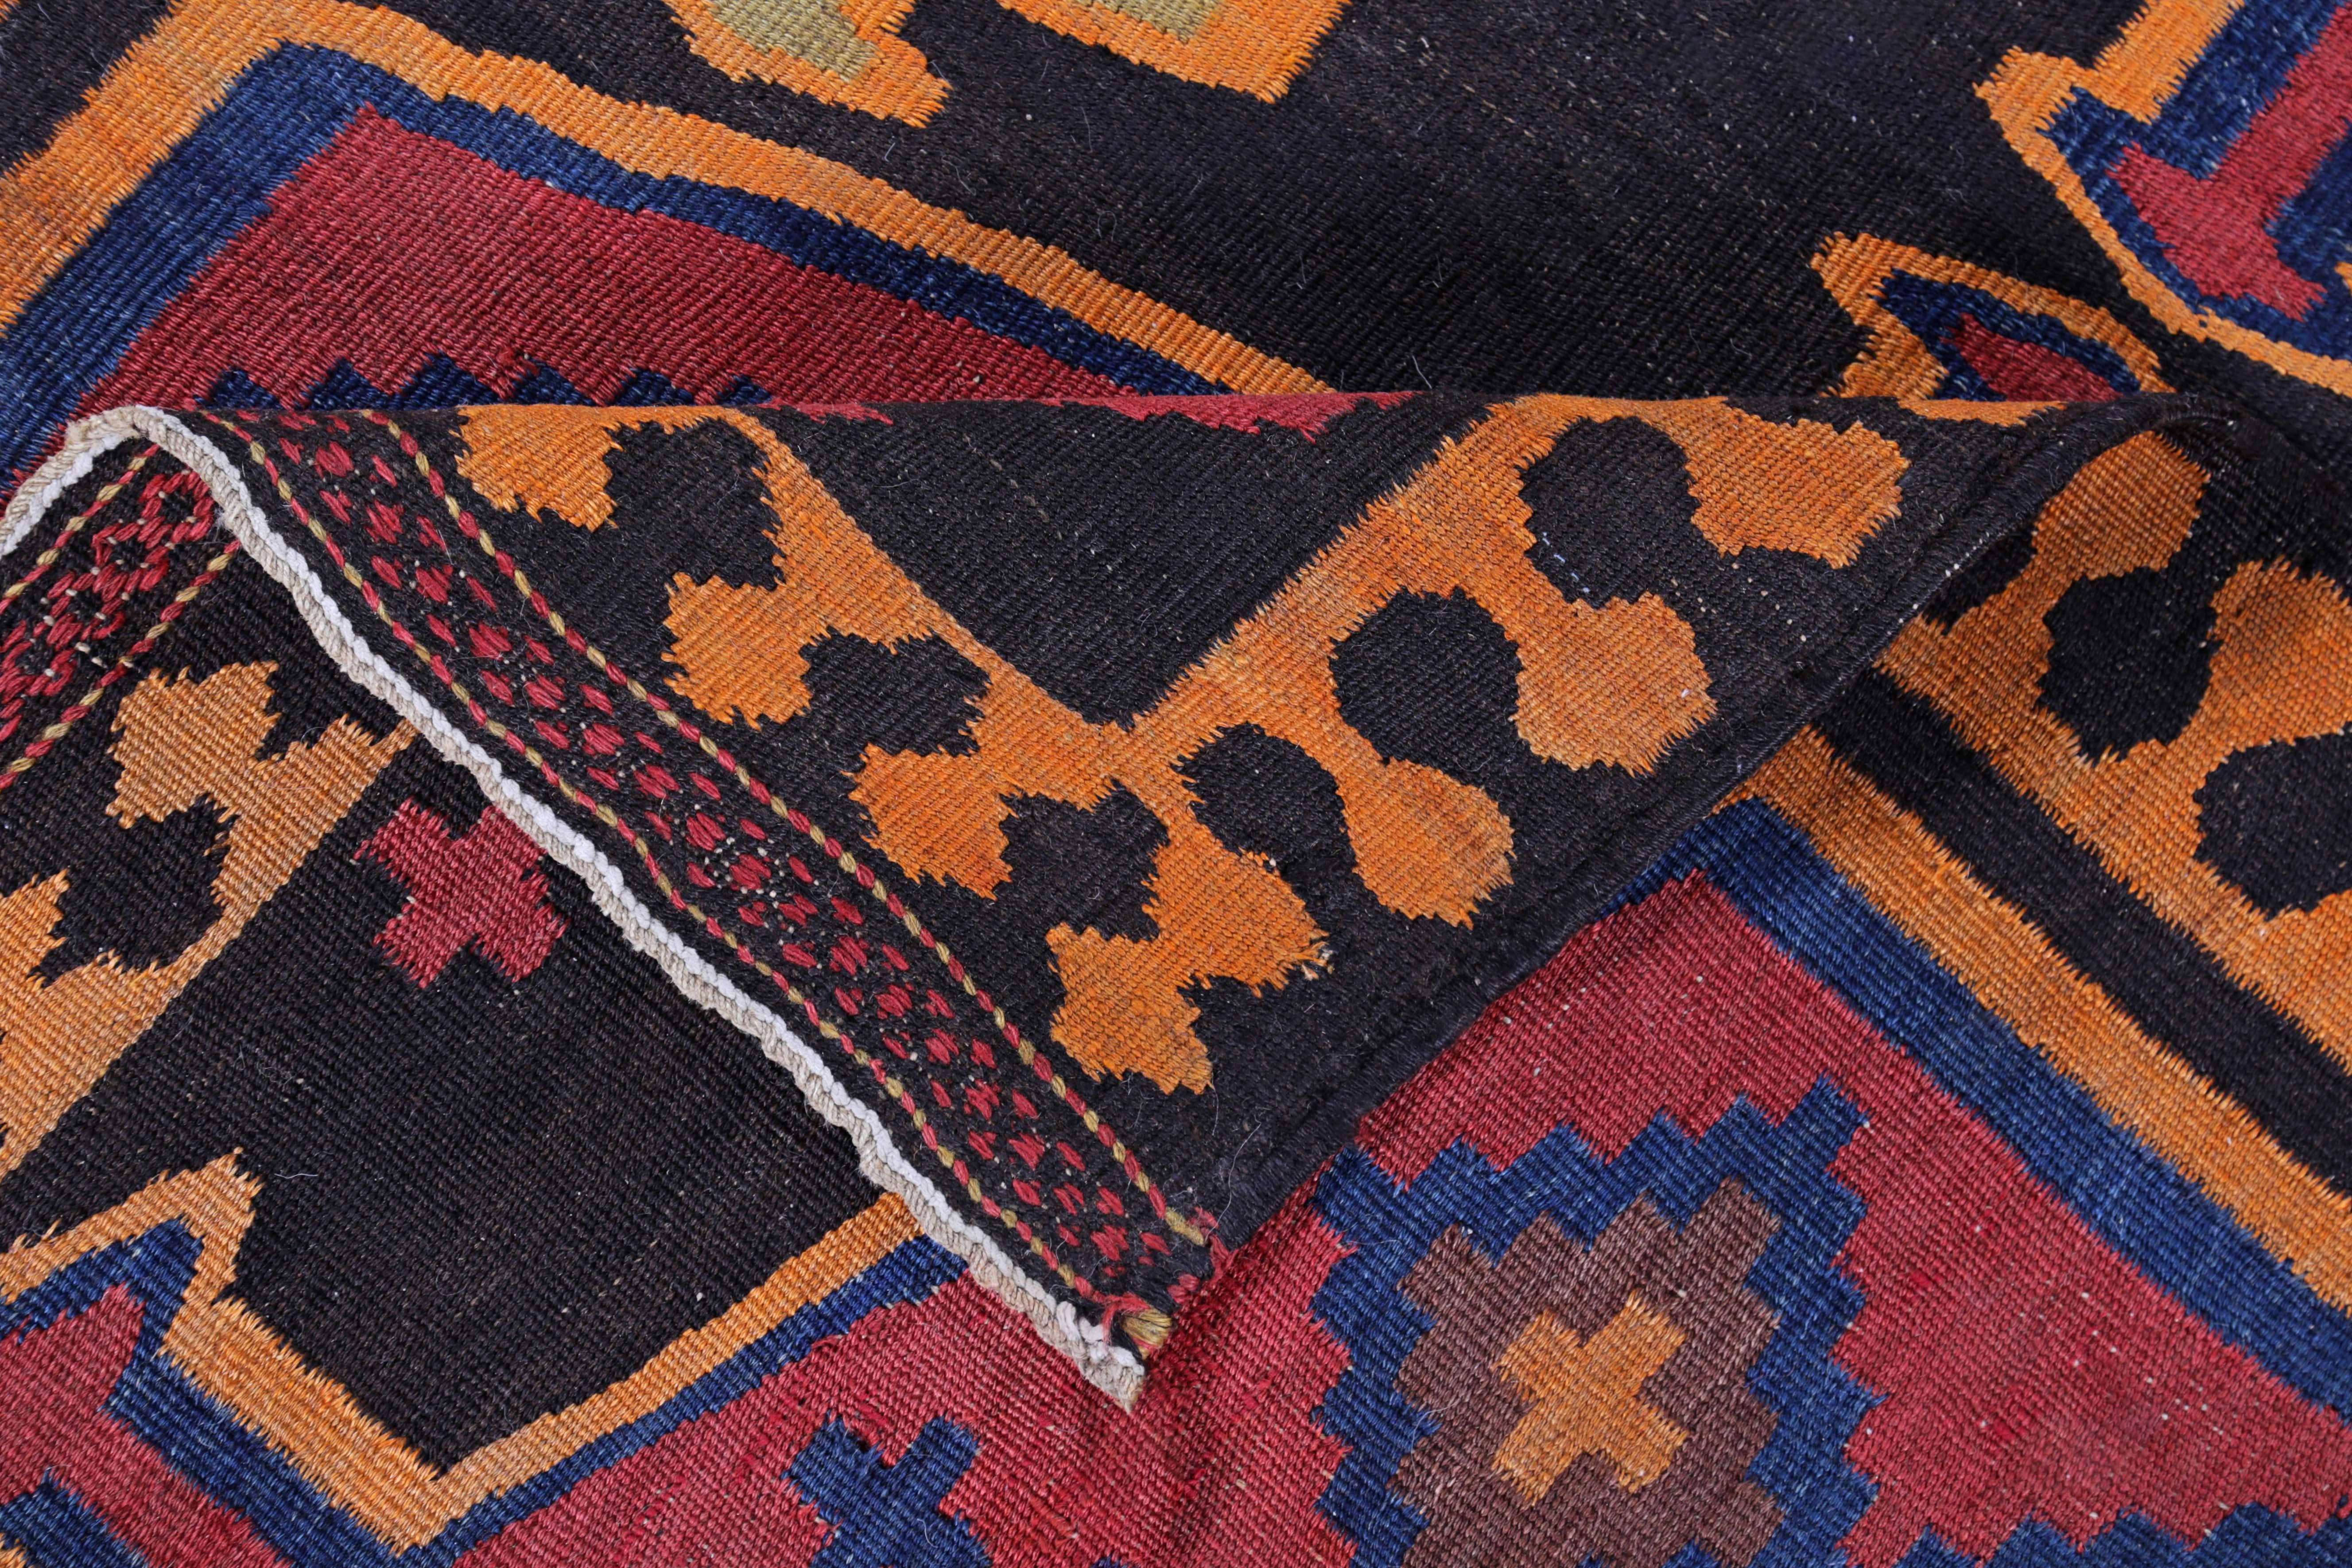 Turkish Kilim Runner Rug with Tribal Details in Red, Orange and Black In New Condition For Sale In Dallas, TX